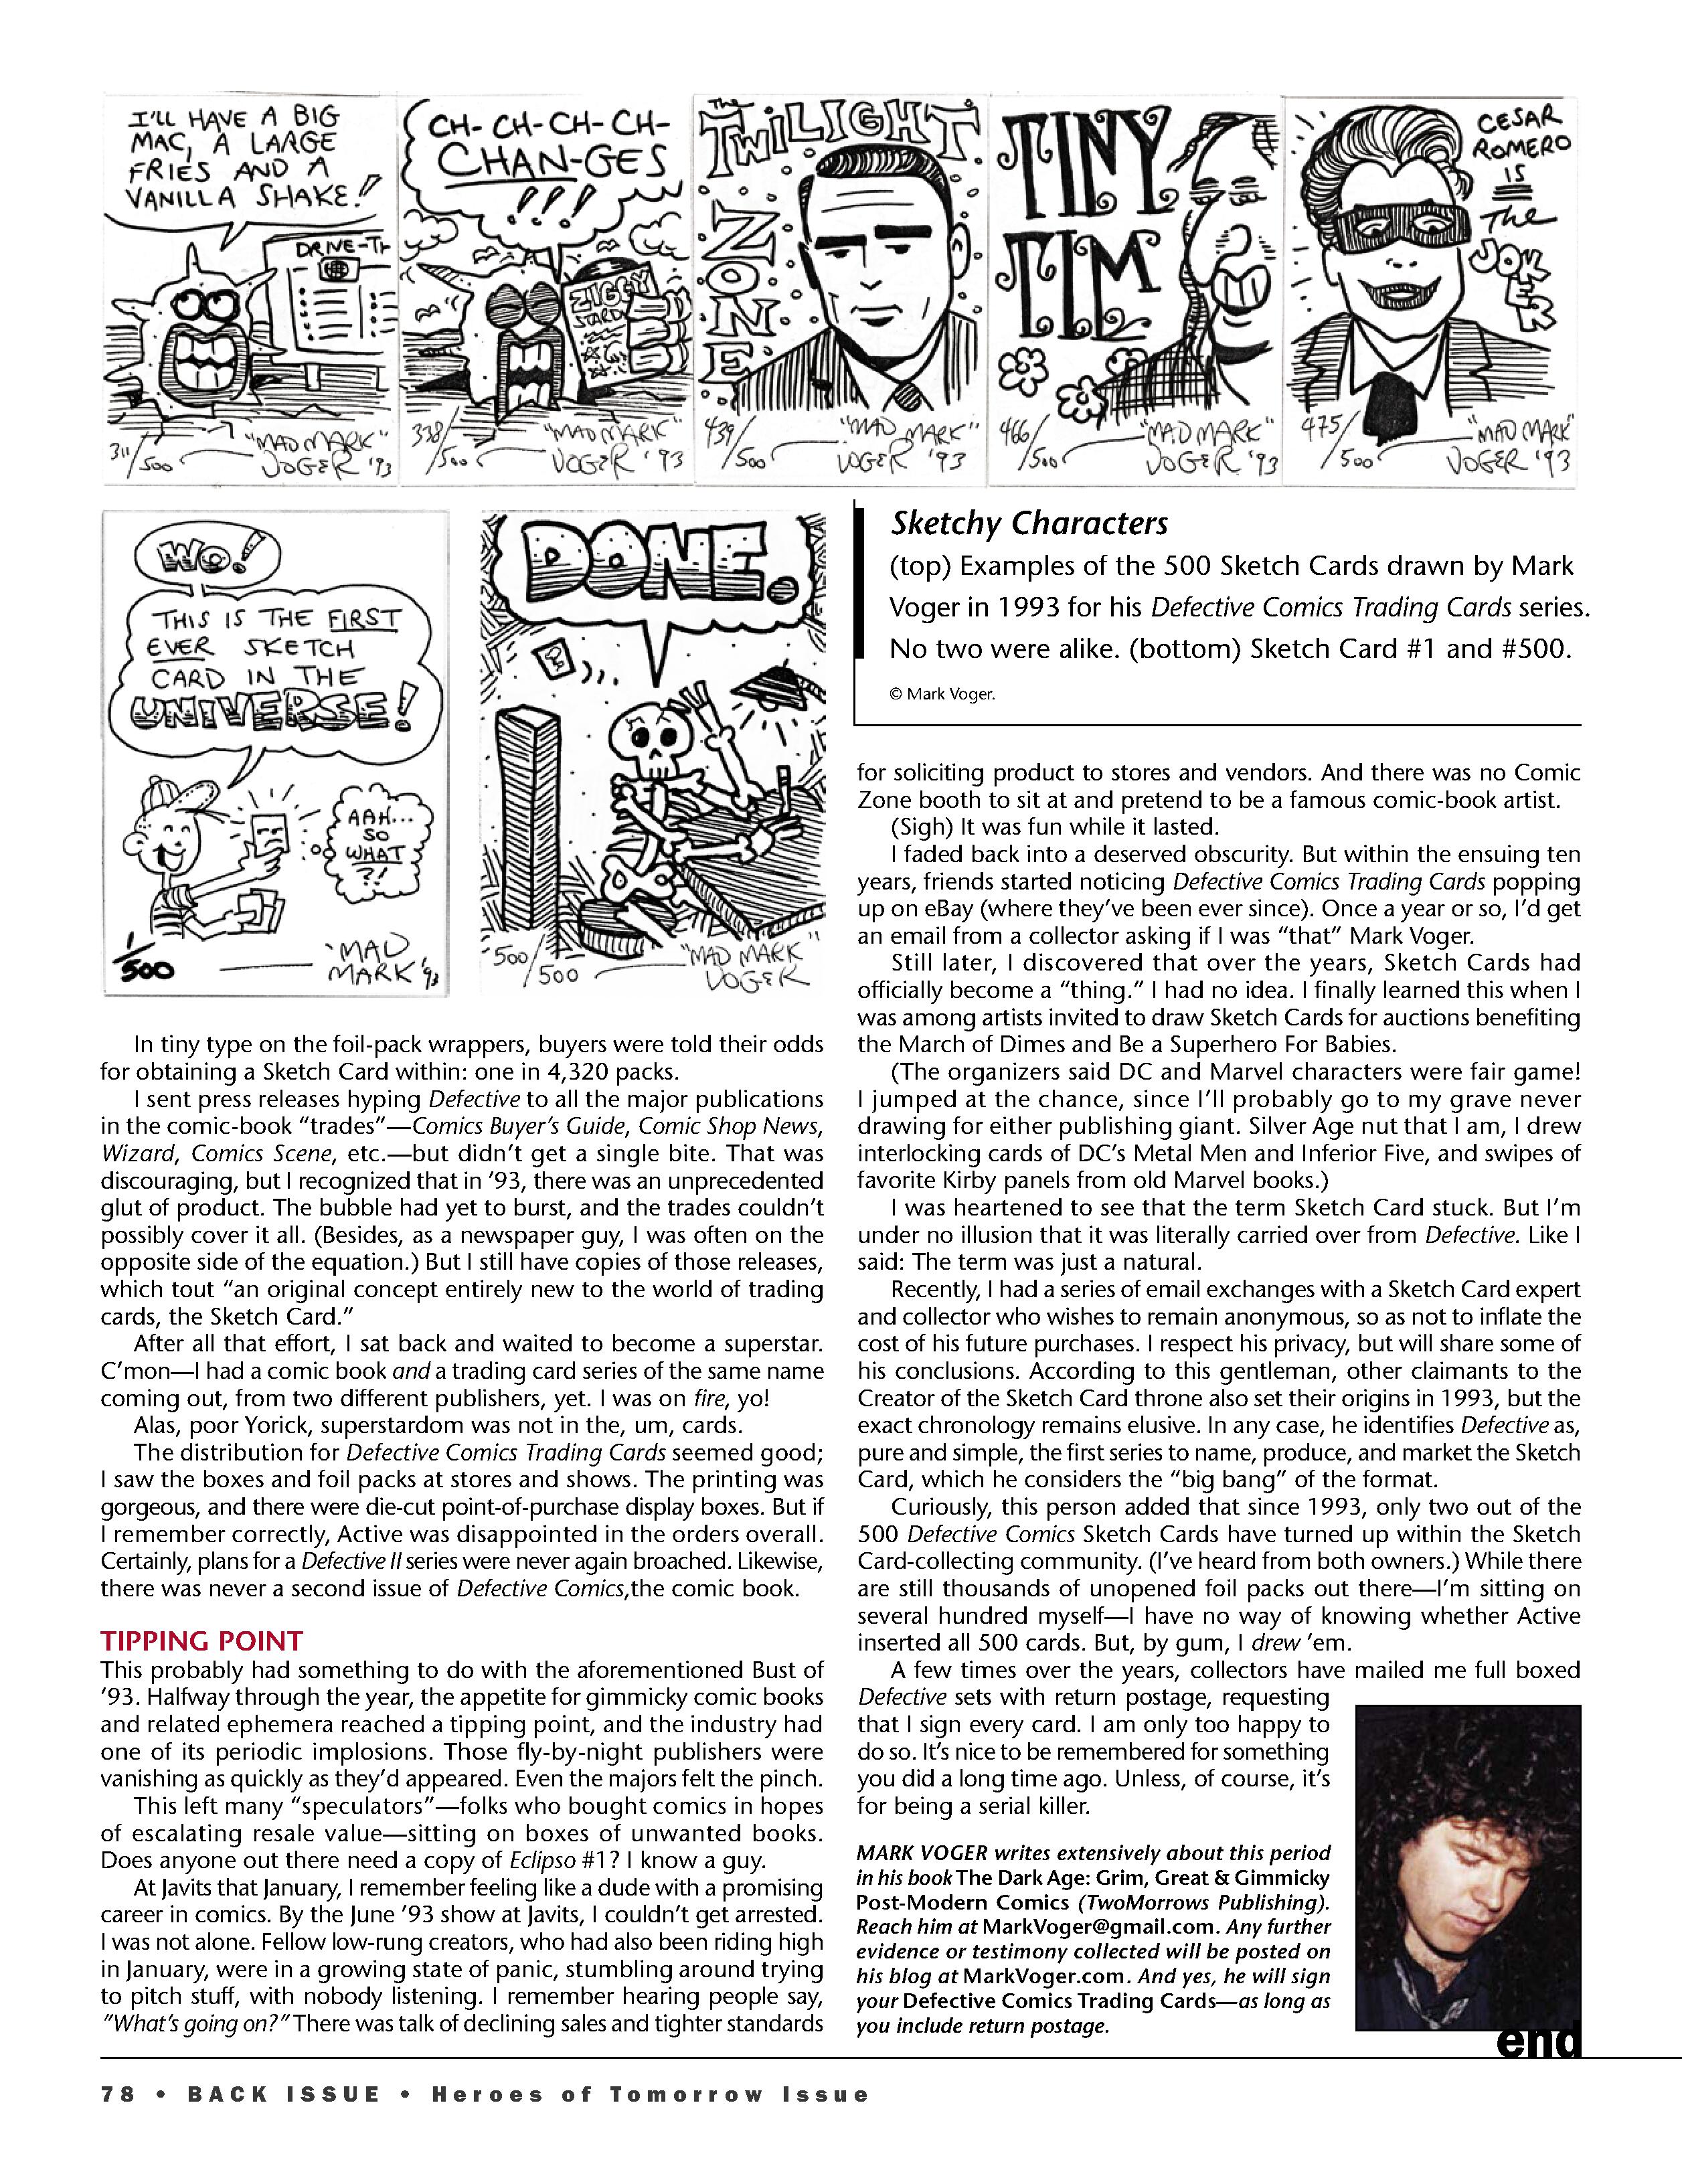 Read online Back Issue comic -  Issue #120 - 80